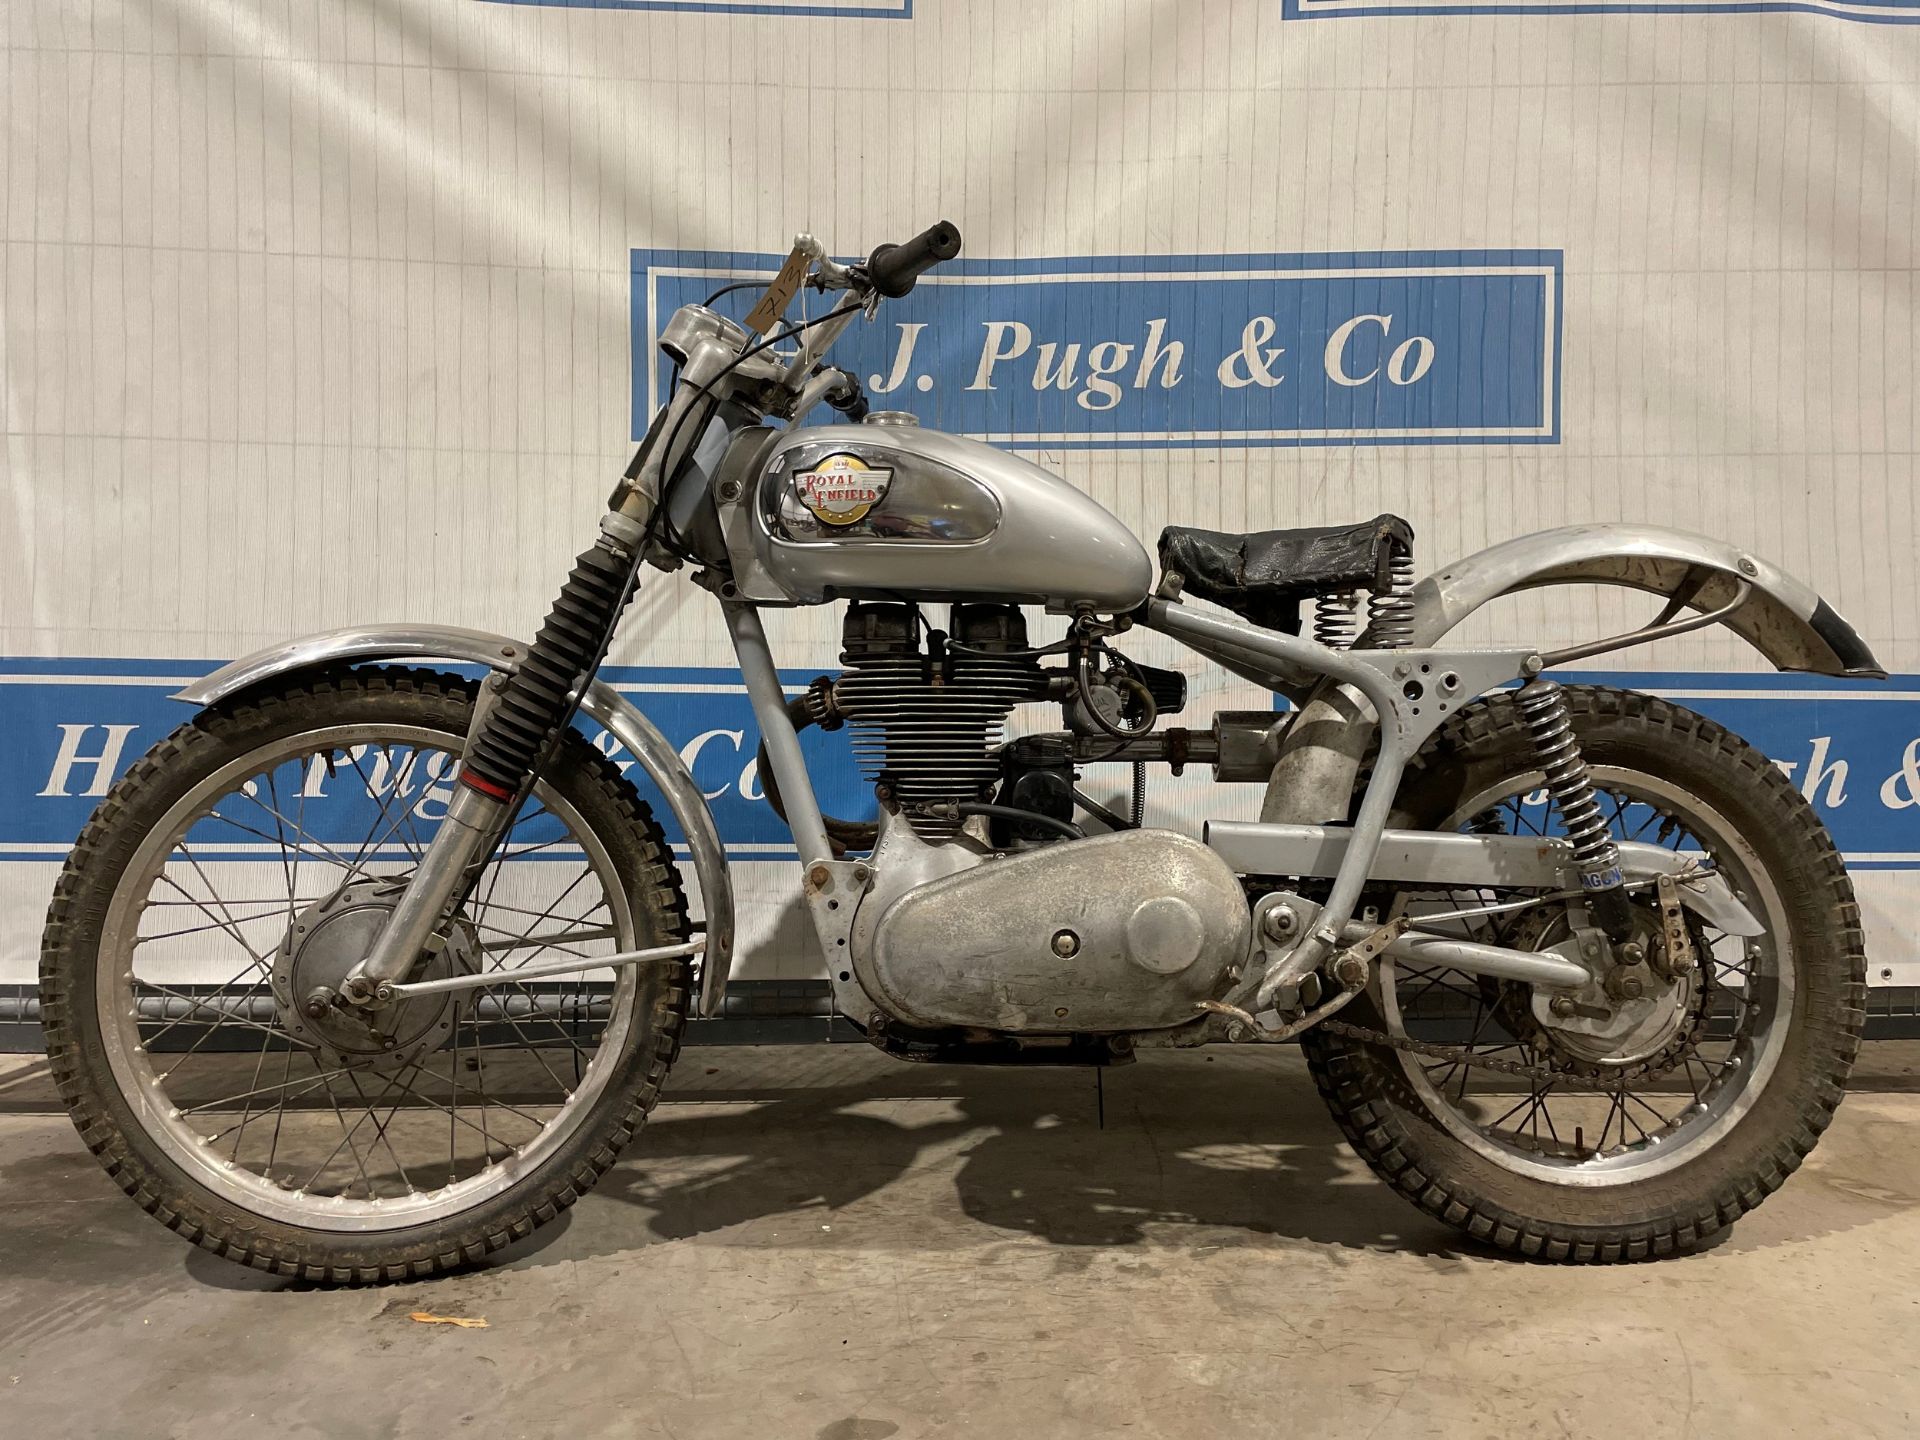 Royal Enfield 350cc motorcycle. 1959. Performs well. Reg 631 XVU. V5 - Image 11 of 16